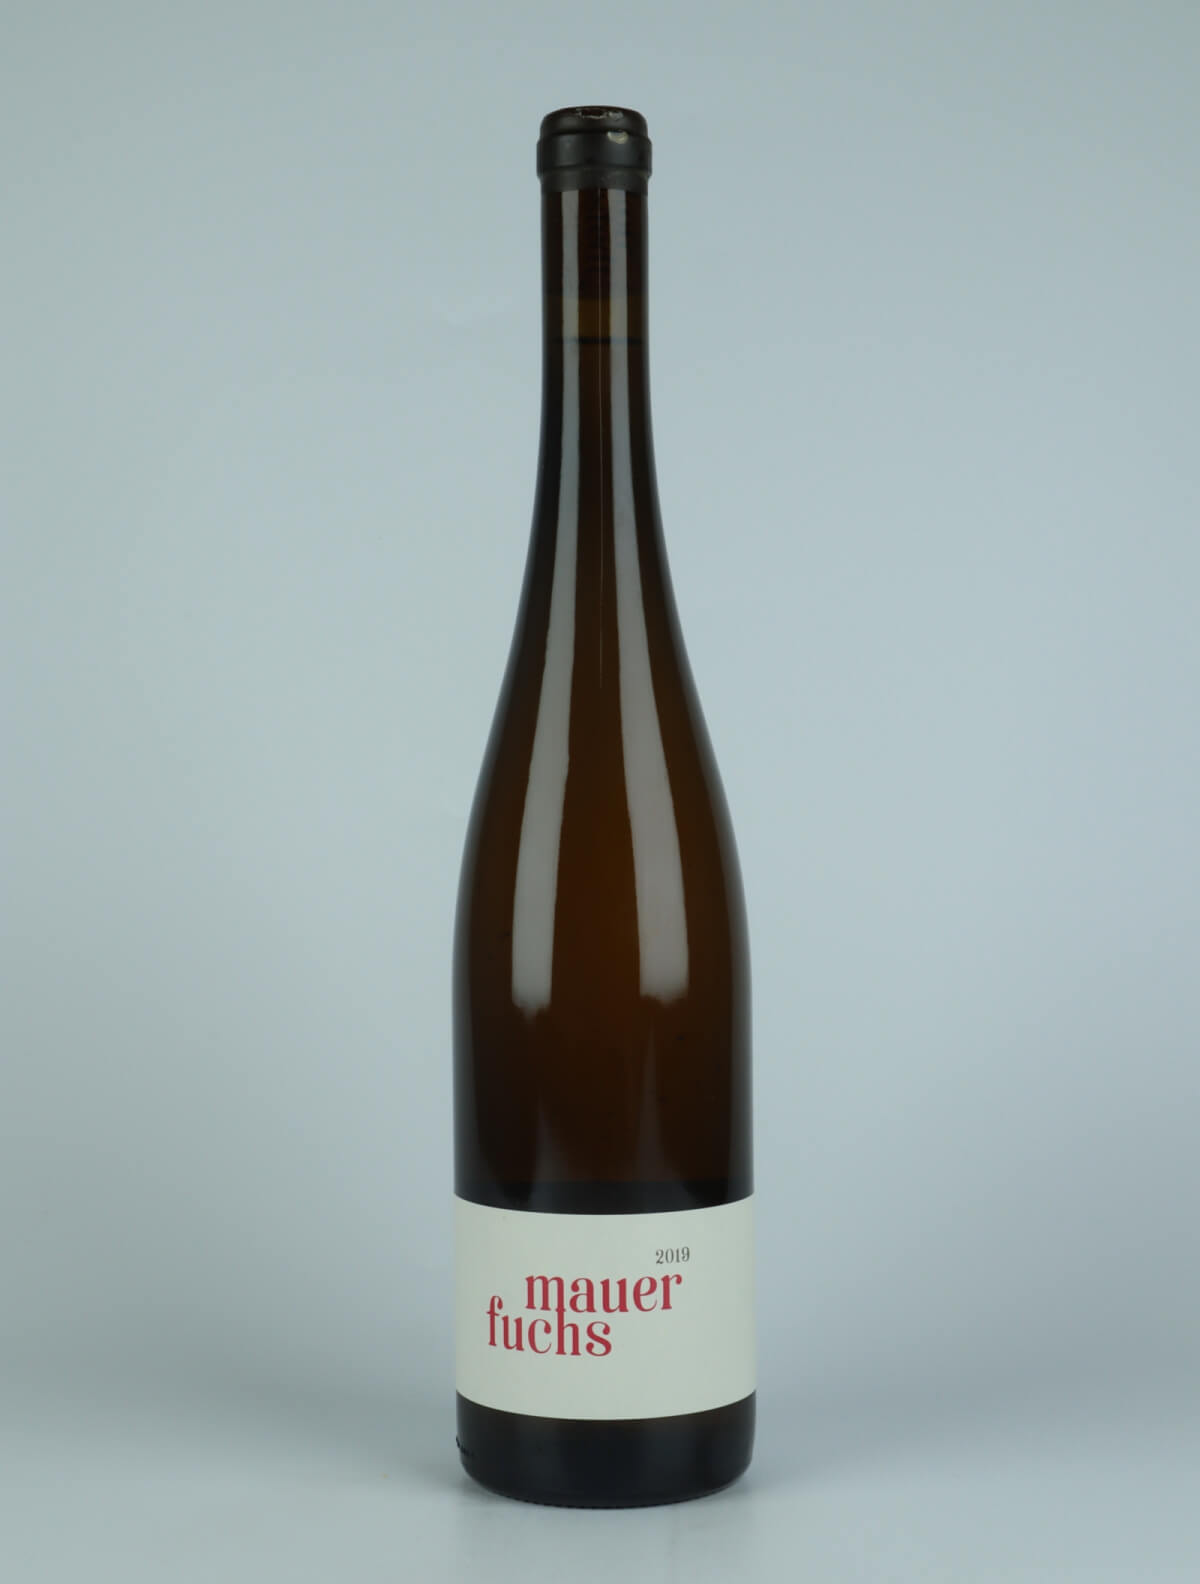 A bottle 2019 Mauerfuchs White wine from Jakob Tennstedt, Mosel in Germany